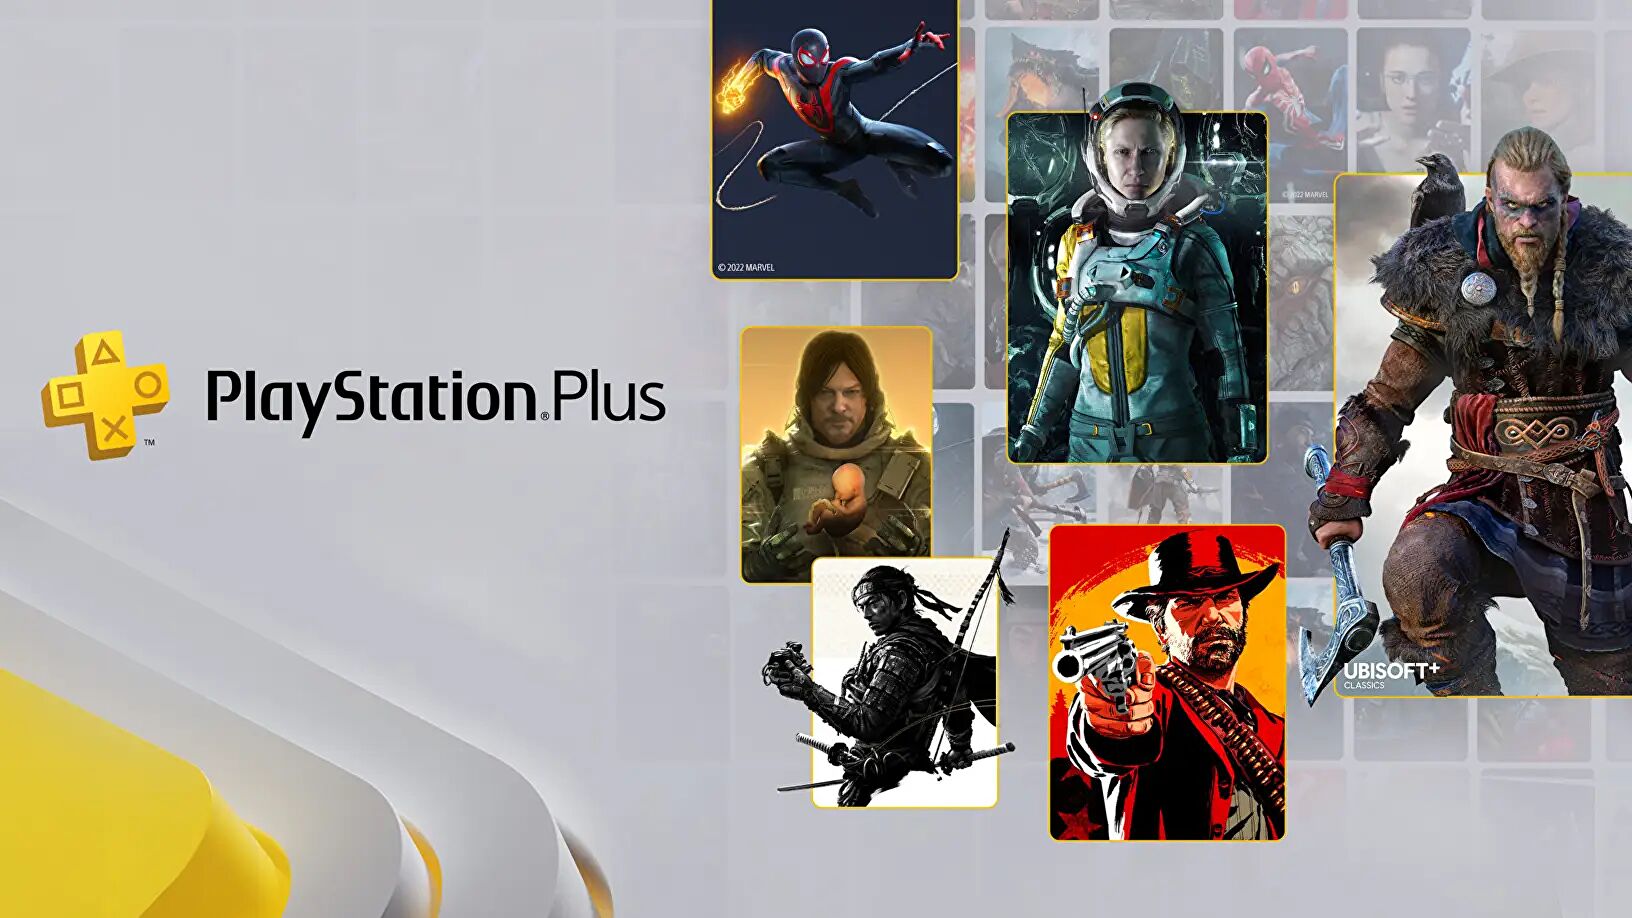 Image for PlayStation Plus launches in Asia, though fans say its catalogue has far fewer games than expected